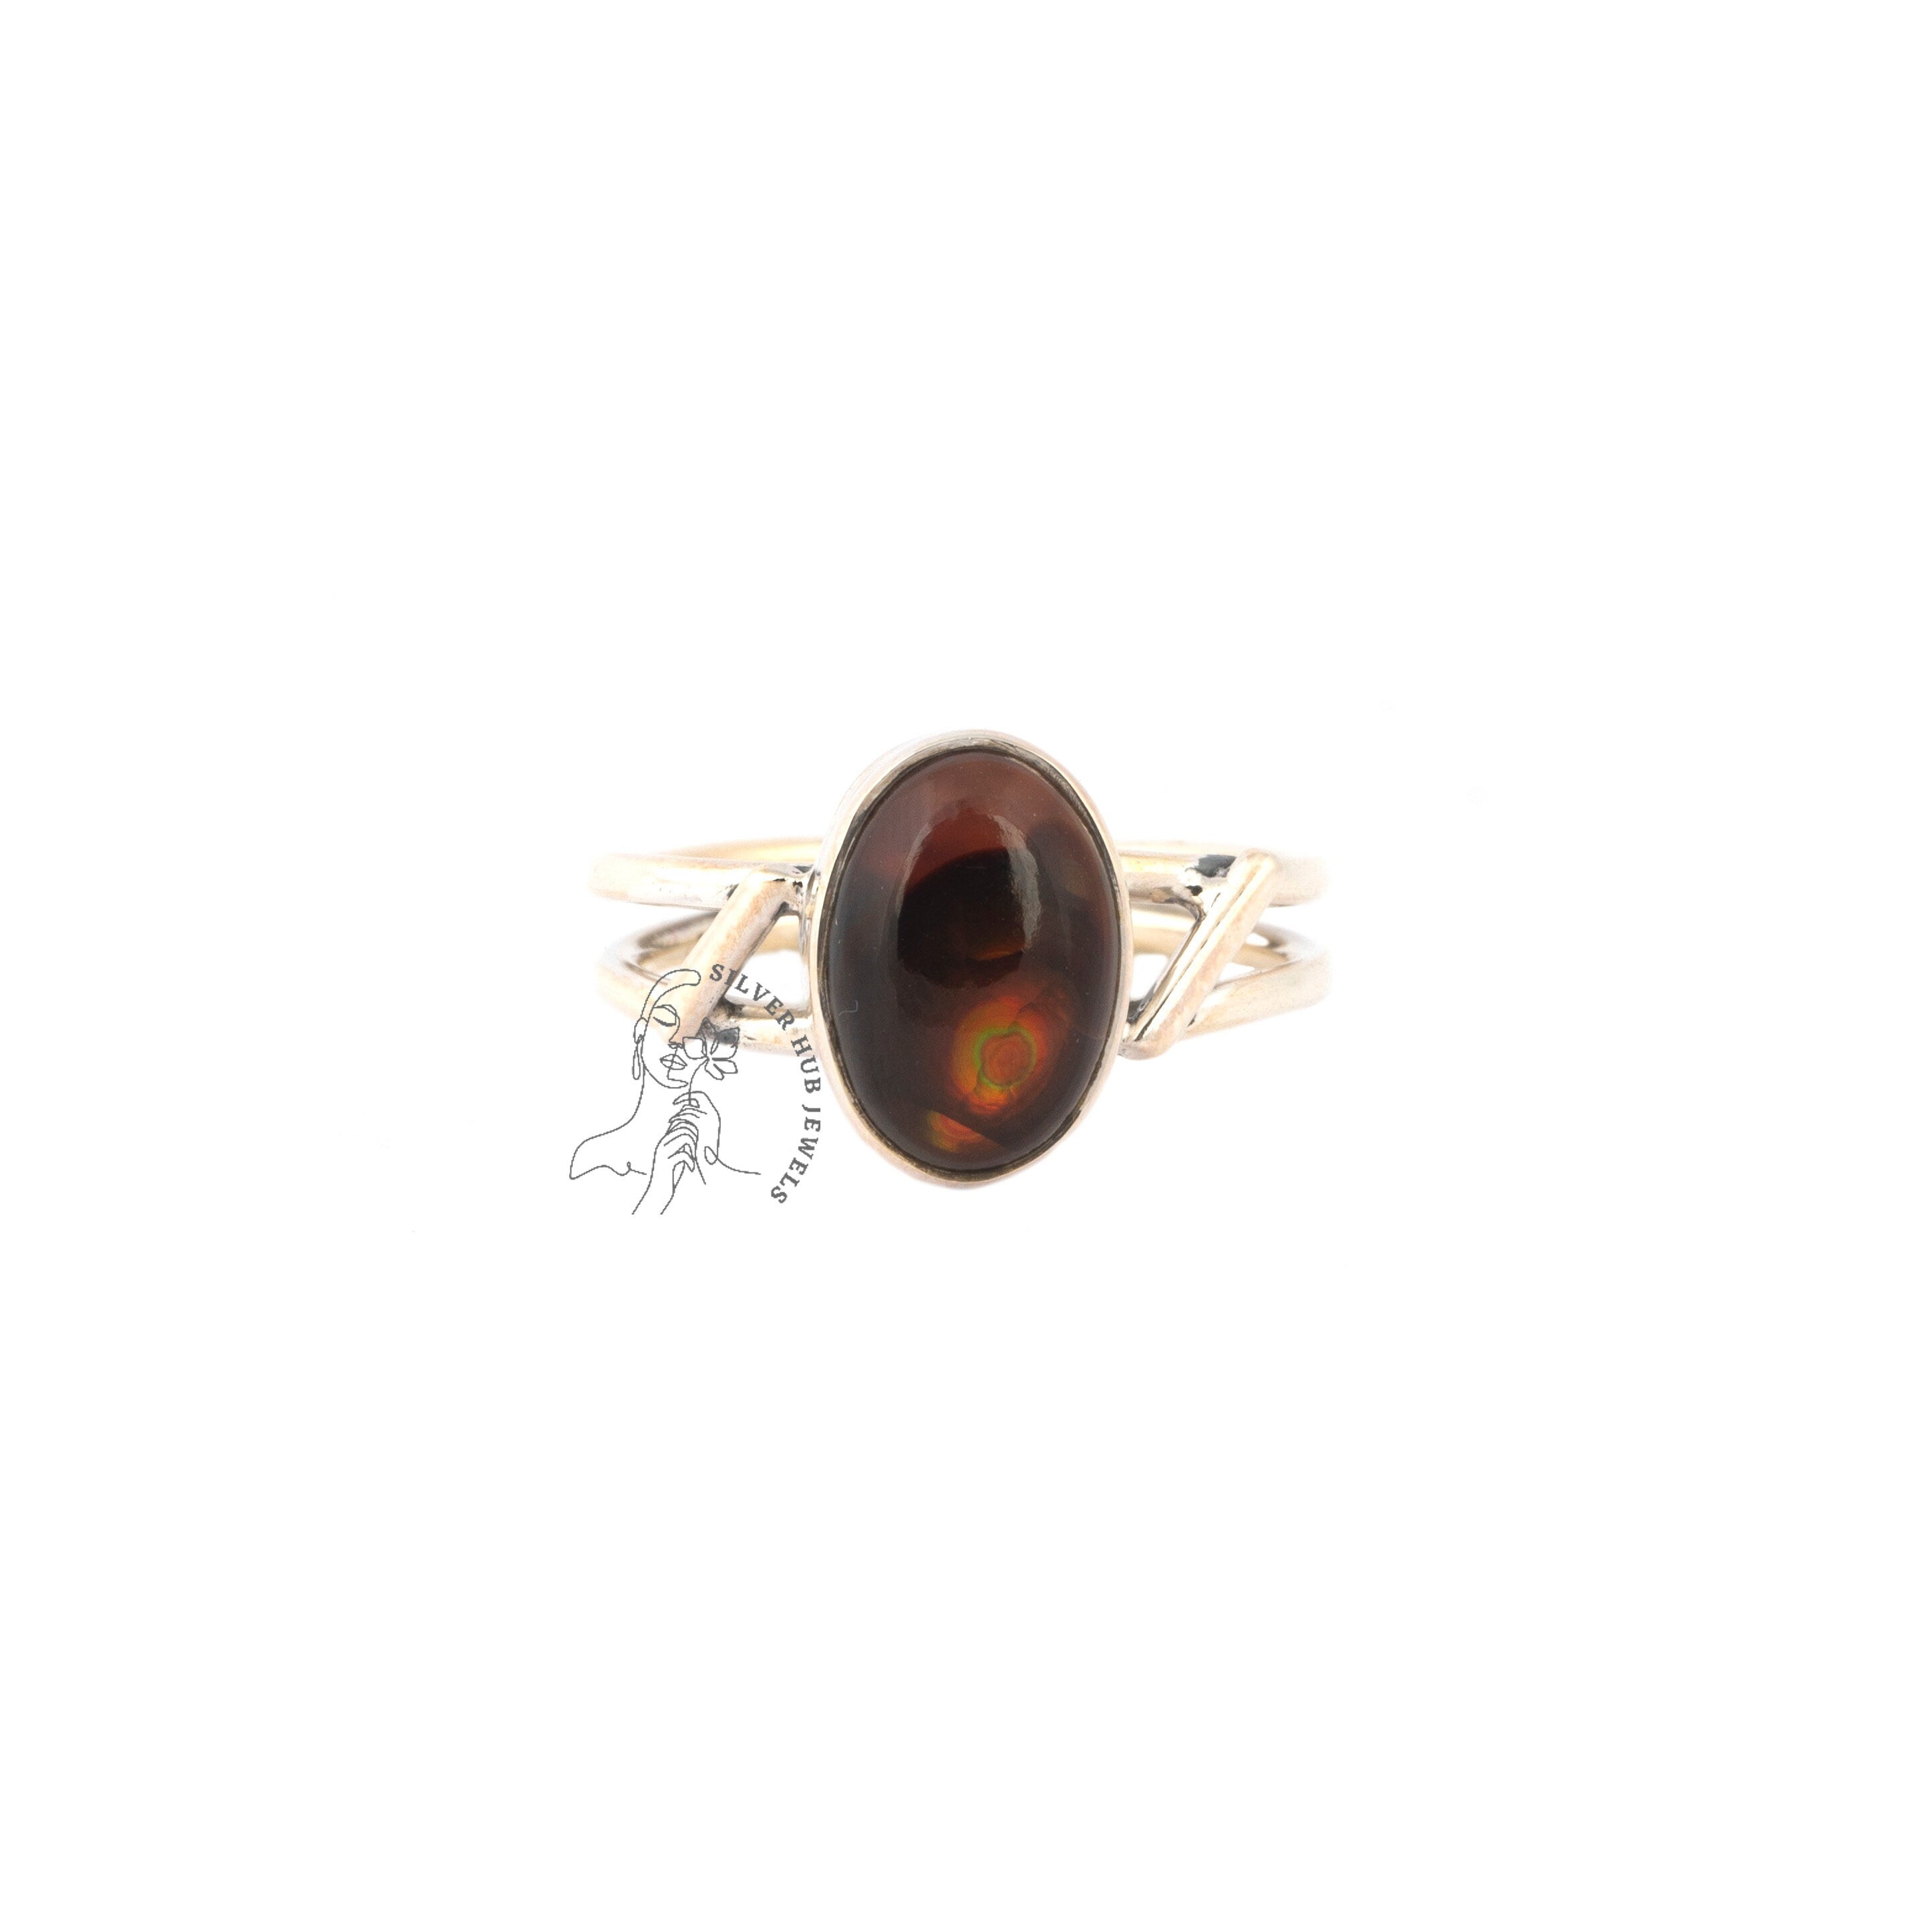 Valuable Fire Agate Ring, Gemstone Ring, Brown Band Ring, 925 Sterling Silver Jewelry, Wedding Anniversary Gift, Ring For Her